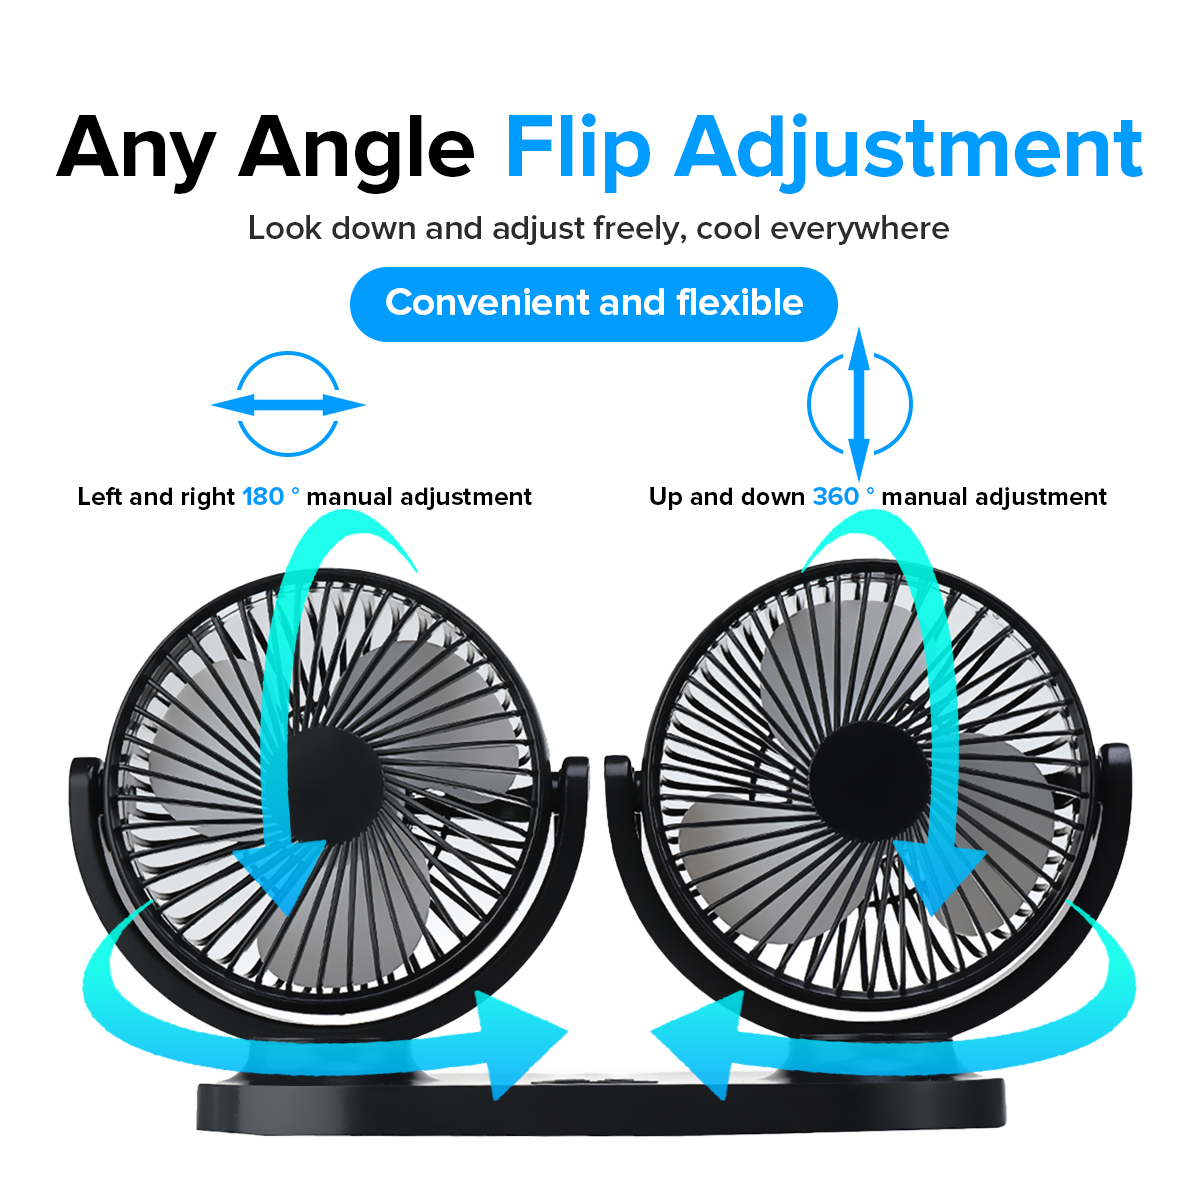 24V-Mini-Dual-Head-Fan-Car-Van-Home-Silent-Cooler-Cooling-Fan-USB-Rechargeable-Outdoor-Camping-Trave-1762386-2